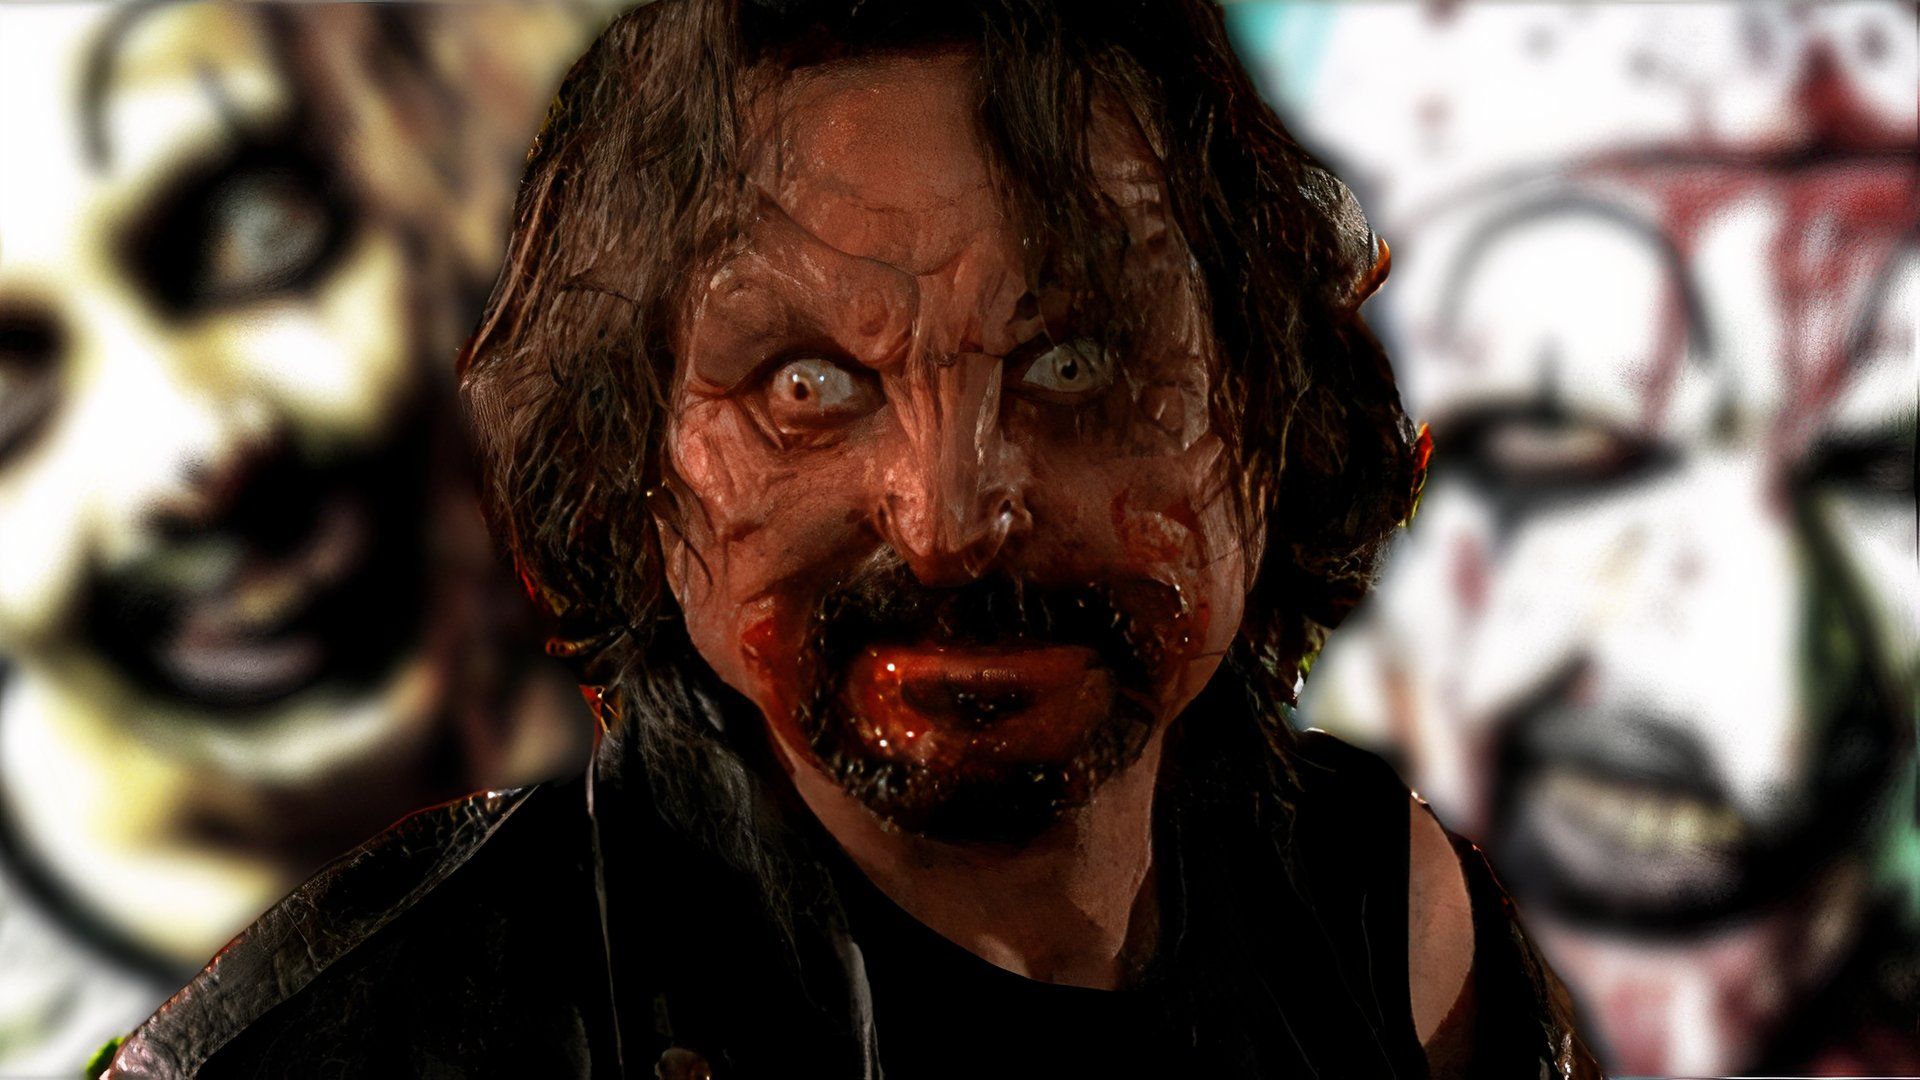 Tom Savini as a vampire with Terrifier characters in the background